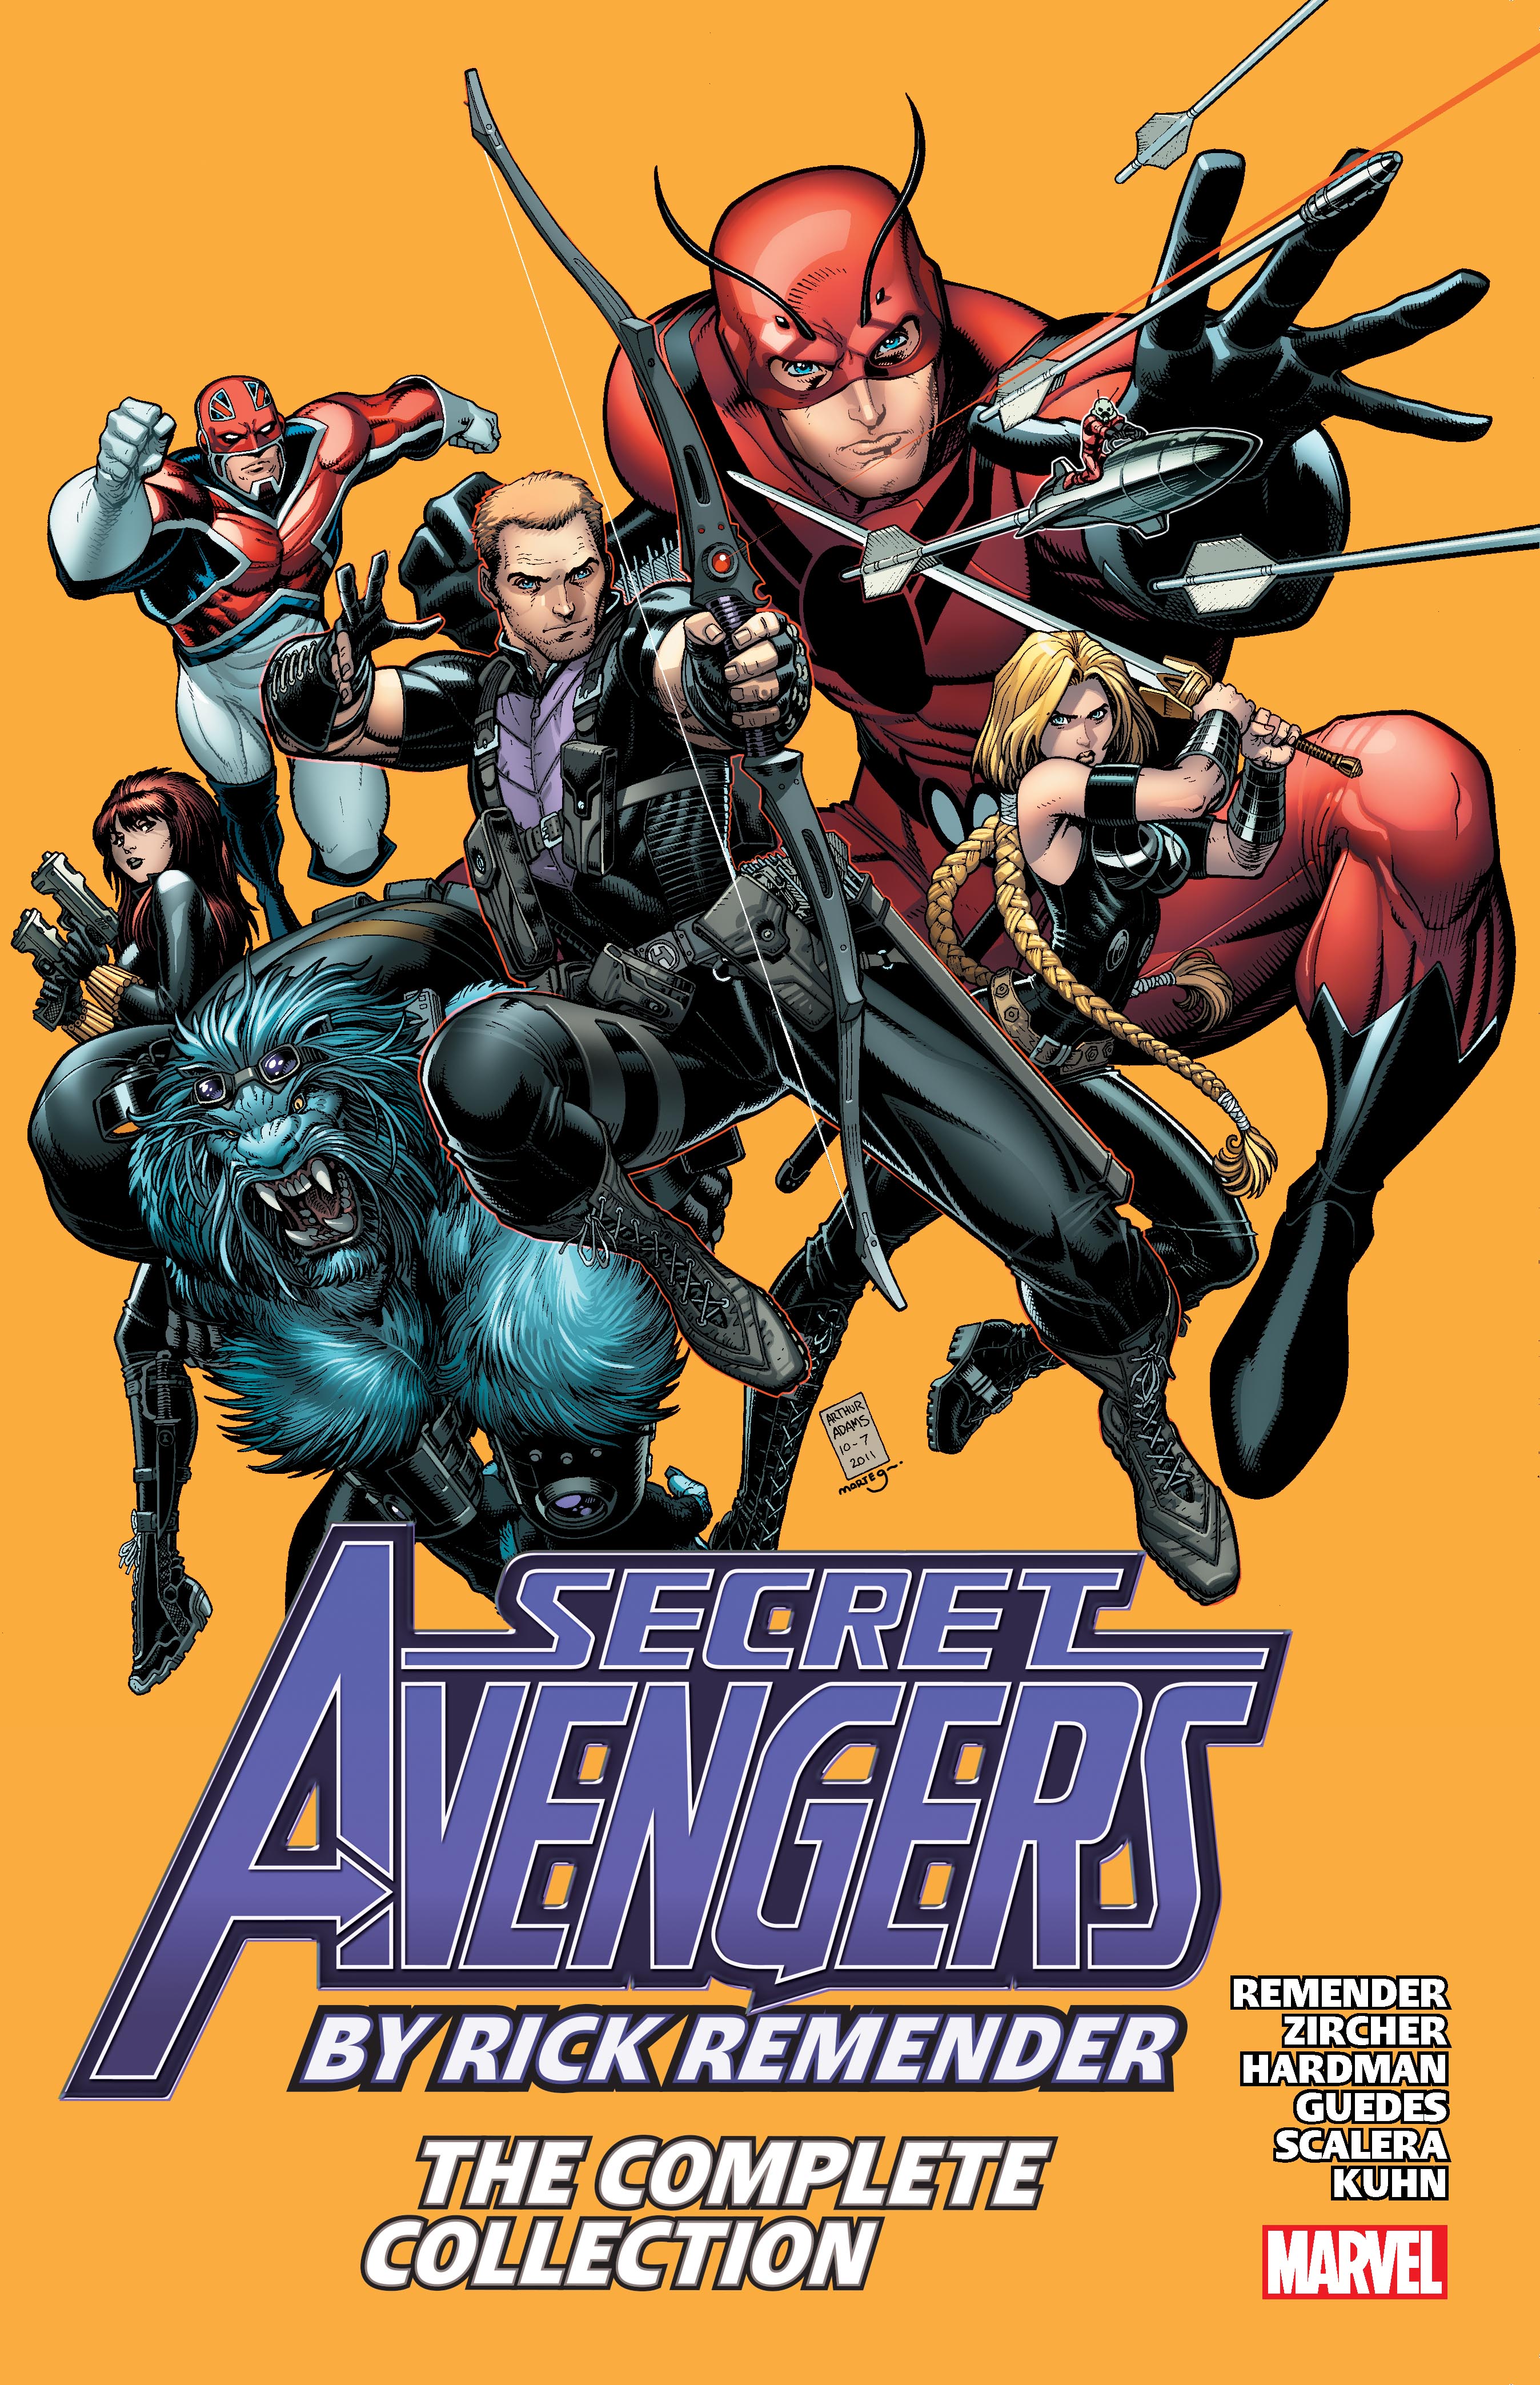 Secret Avengers by Rick Remender: The Complete Collection (Trade Paperback)